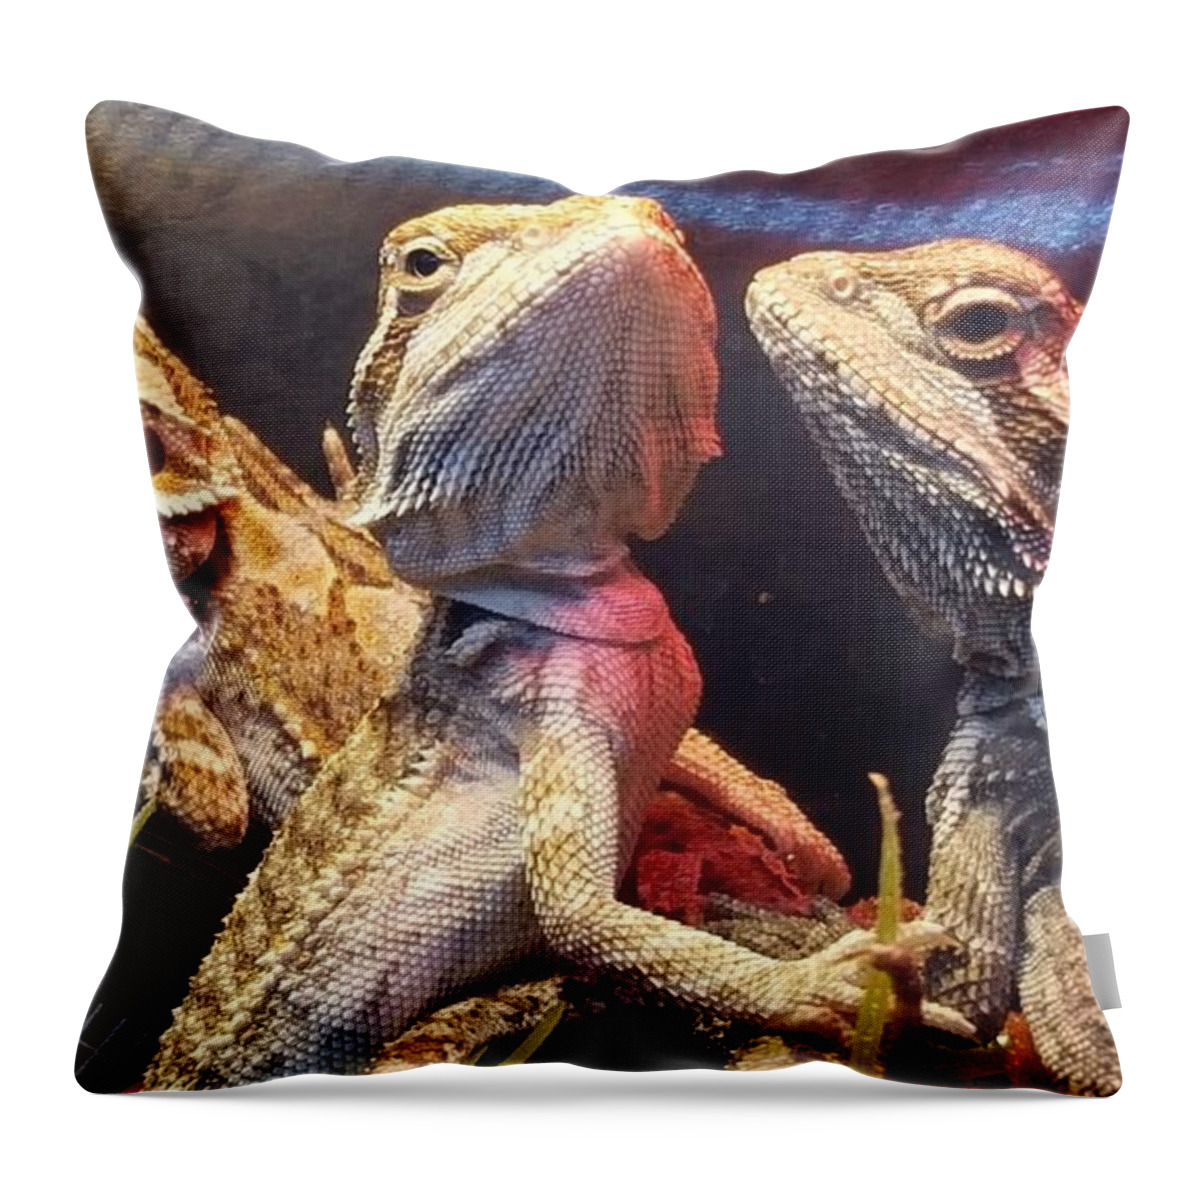 Reptiles Throw Pillow featuring the photograph Posers at the Pet Store by Dani McEvoy